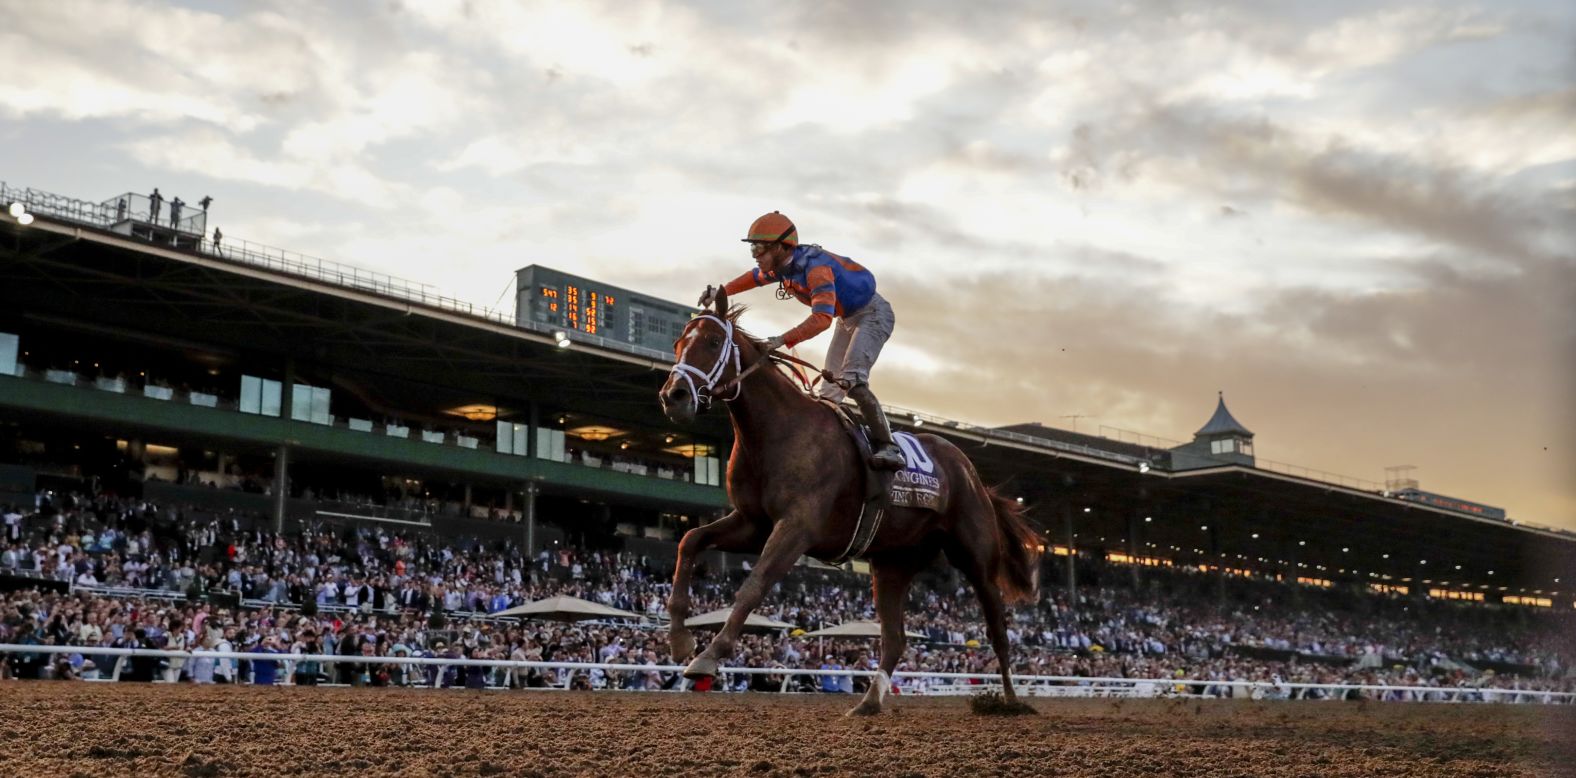 Vino Rosso, ridden by Irad Ortiz, Jr., wins the Longines Breeders' Cup Classic on Saturday, November 2, at Santa Anita Park in Arcadia, California. The race track has had 37 horse deaths in the past 11 months after <a href="https://www.cnn.com/2019/11/02/sport/breeders-cup-horse-racing-winning-post-saturday-spt-intl/index.html" target="_blank">Mongolian Groom was euthanized</a> after a left-hind leg injury on Saturday.